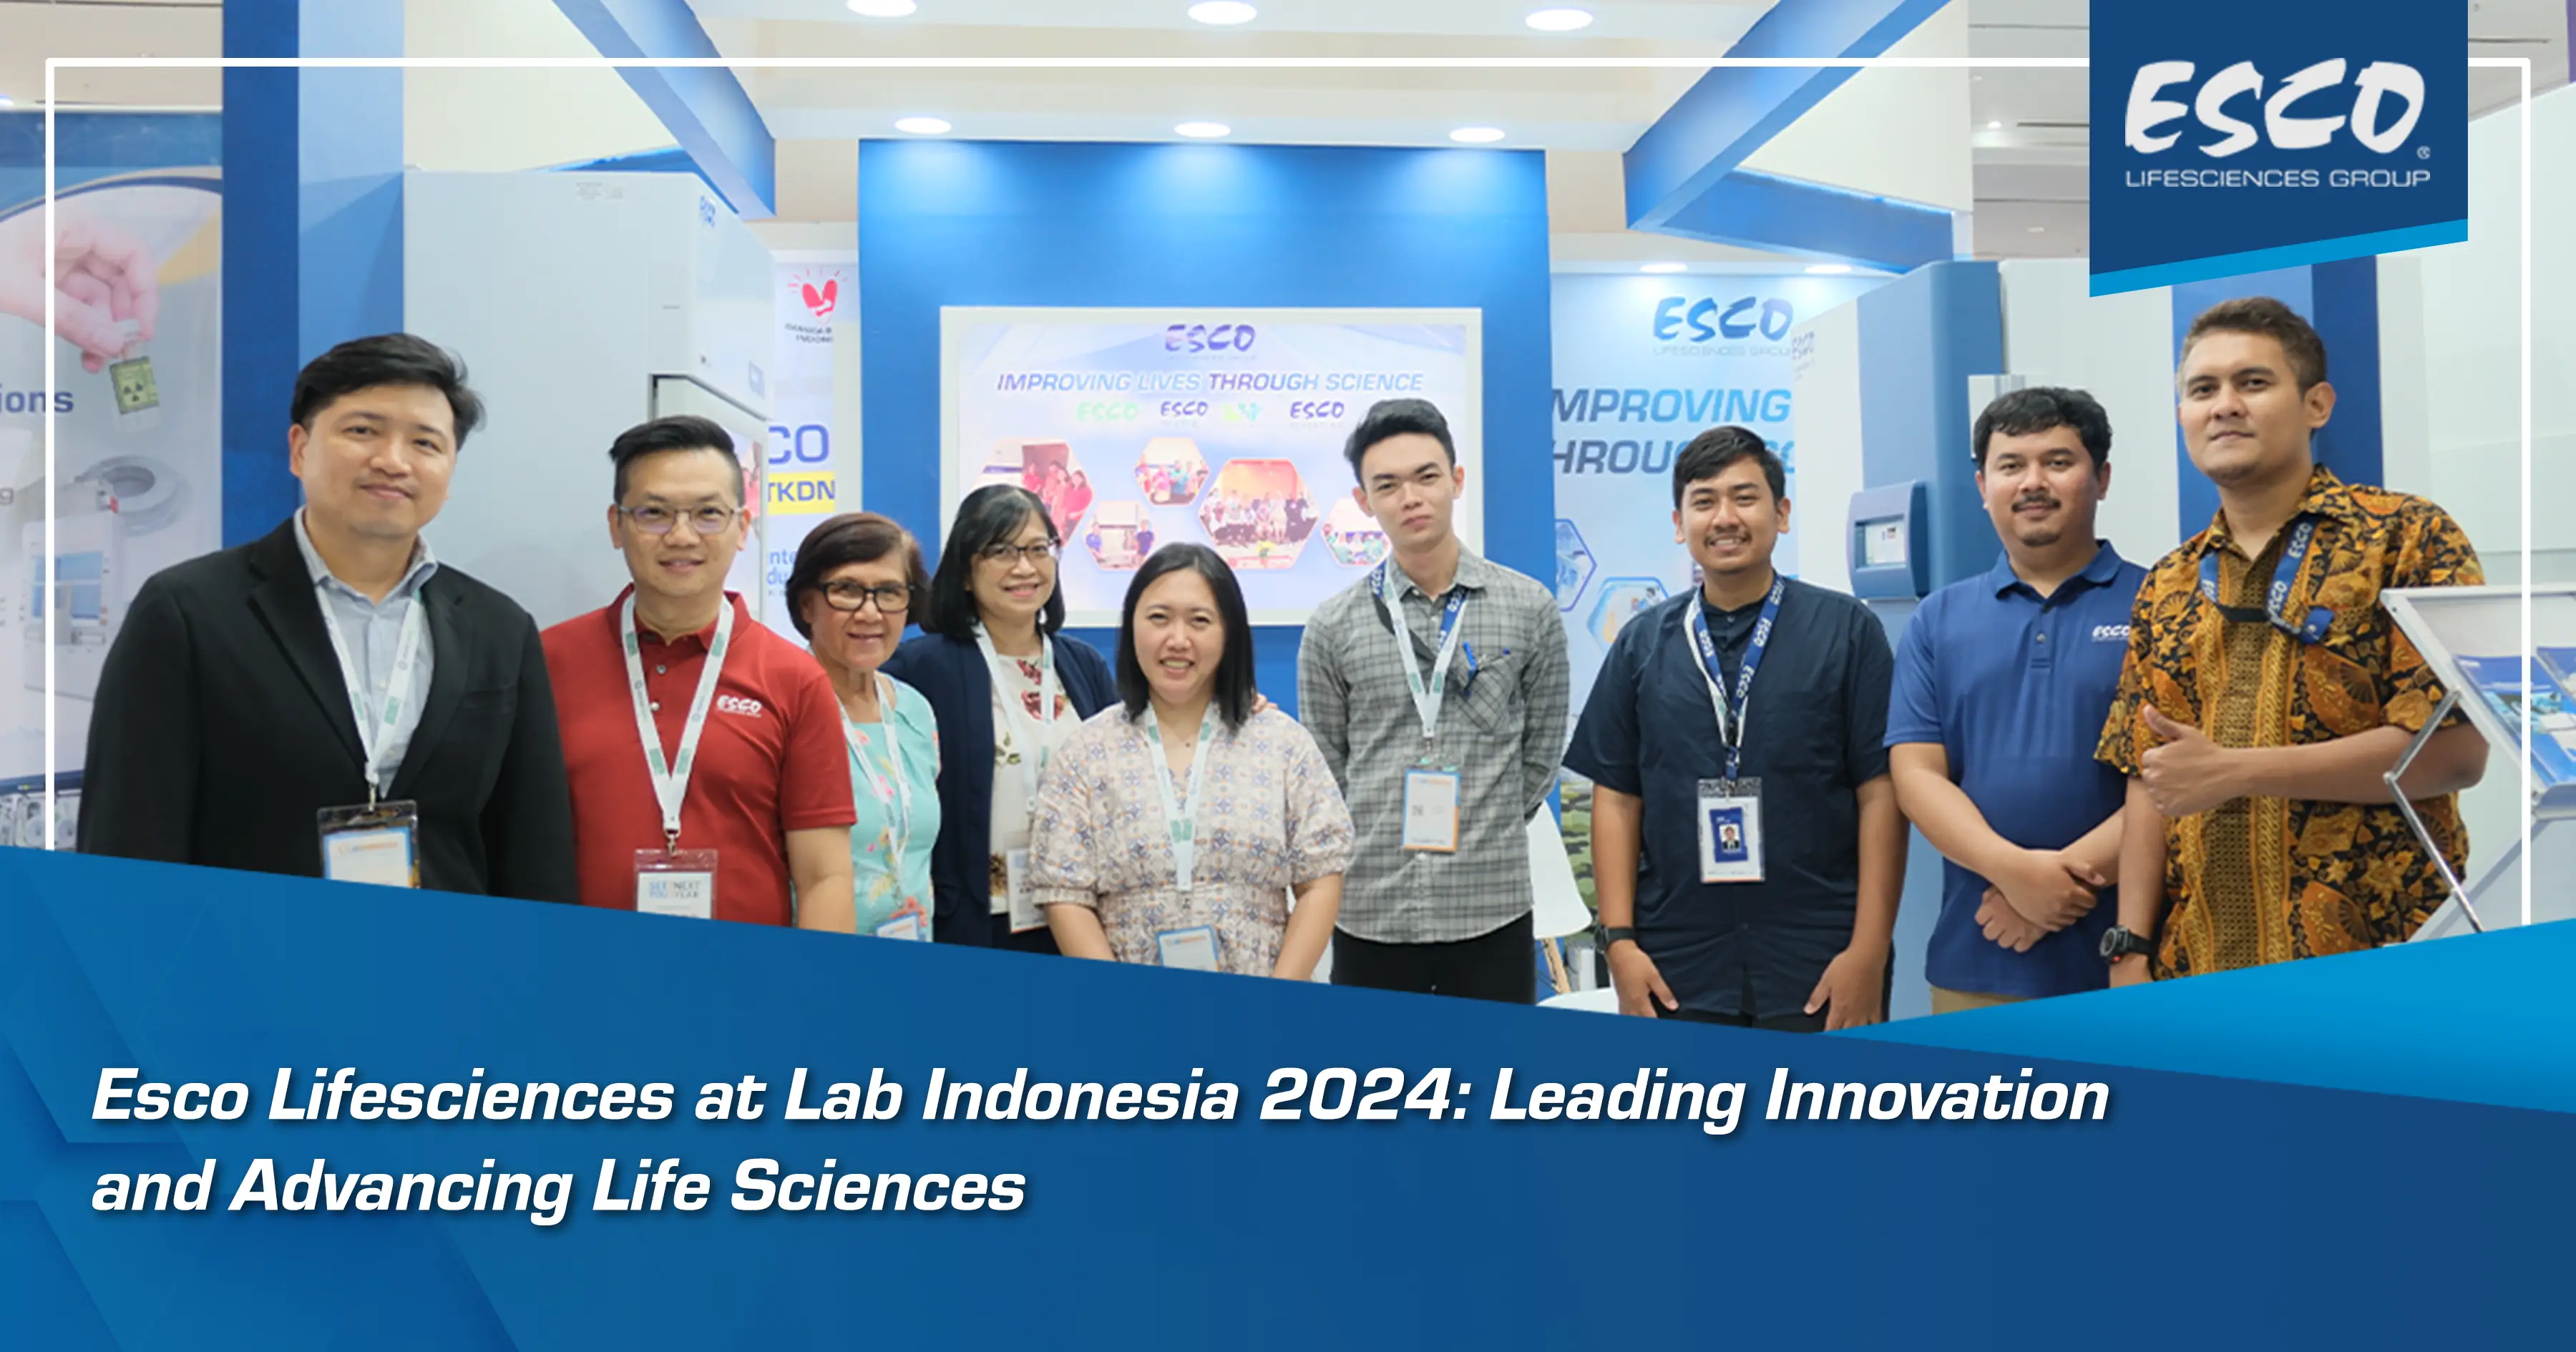 Esco Lifesciences at Lab Indonesia 2024: Leading Innovation and Advancing Life Sciences